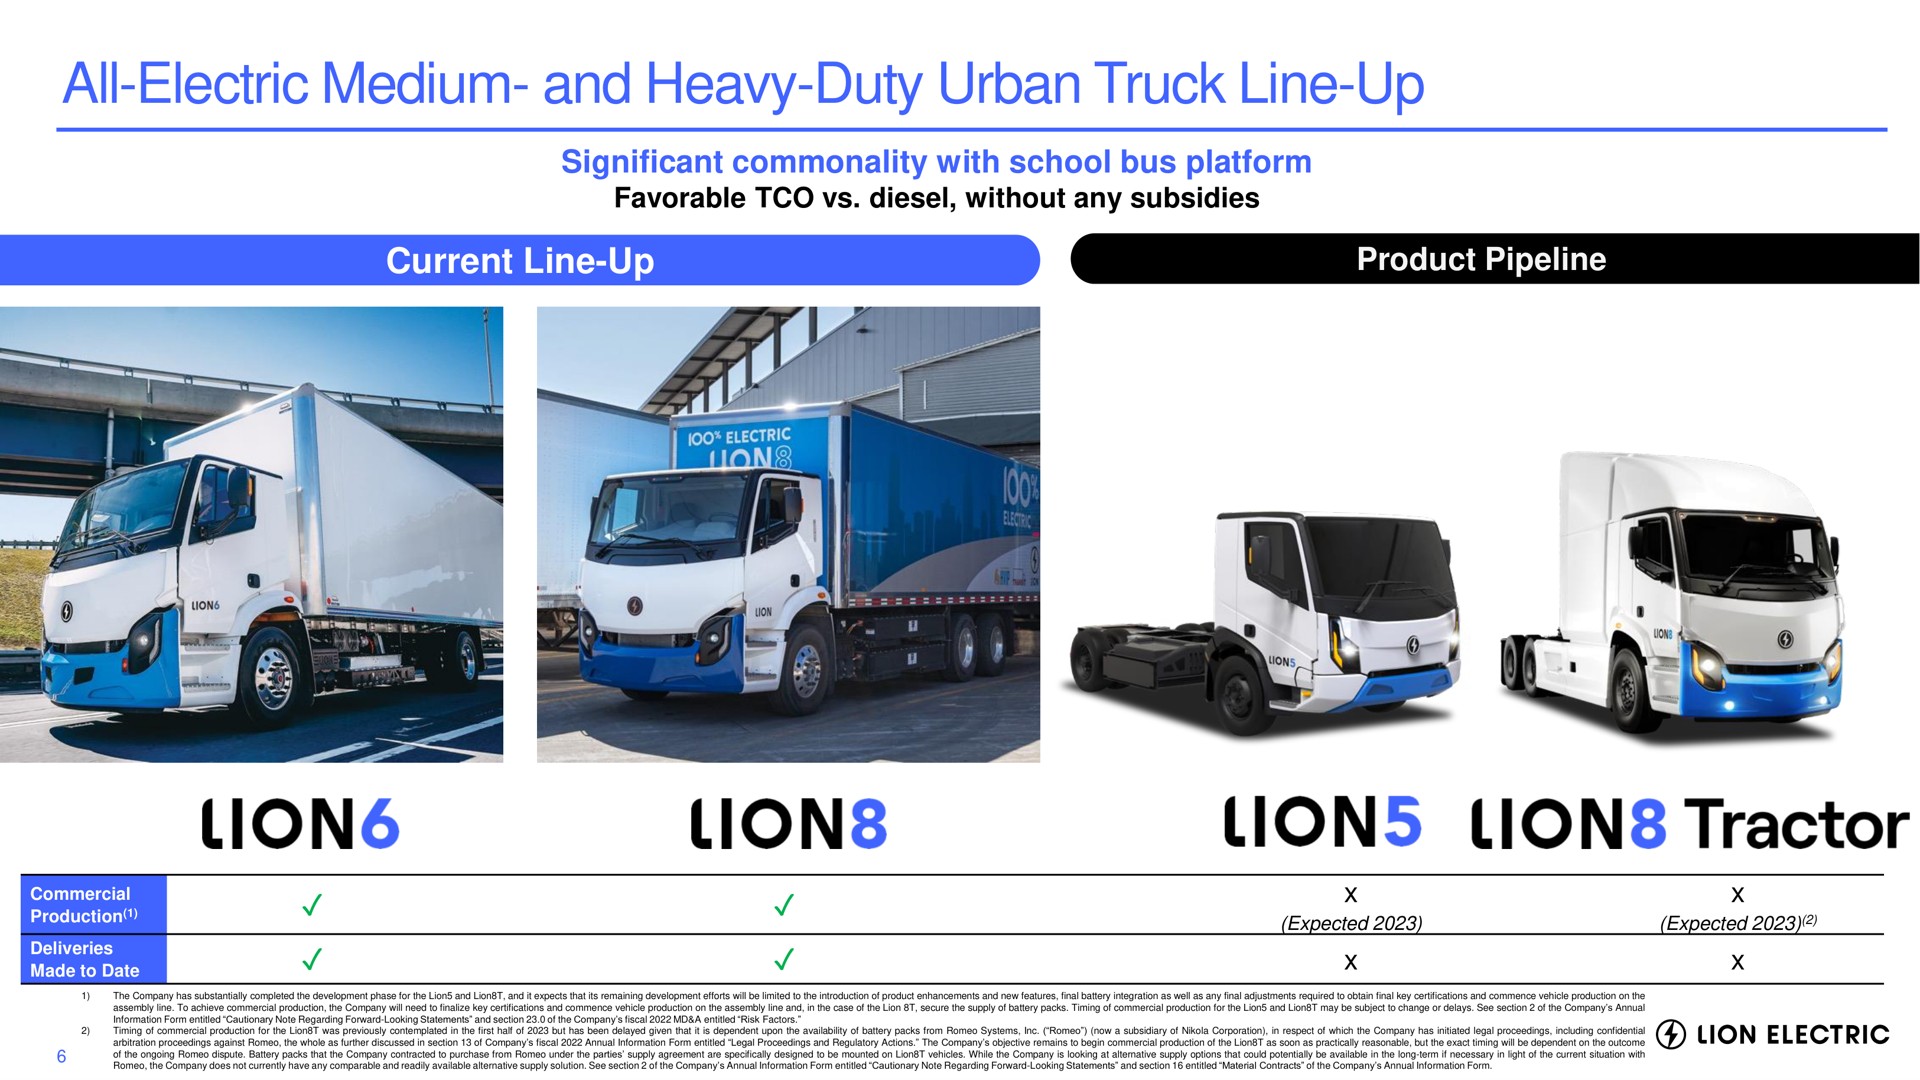 all electric medium and heavy duty urban truck line up significant commonality with school bus platform favorable diesel without any subsidies current line up product pipeline lions lions lions tractor | Lion Electric